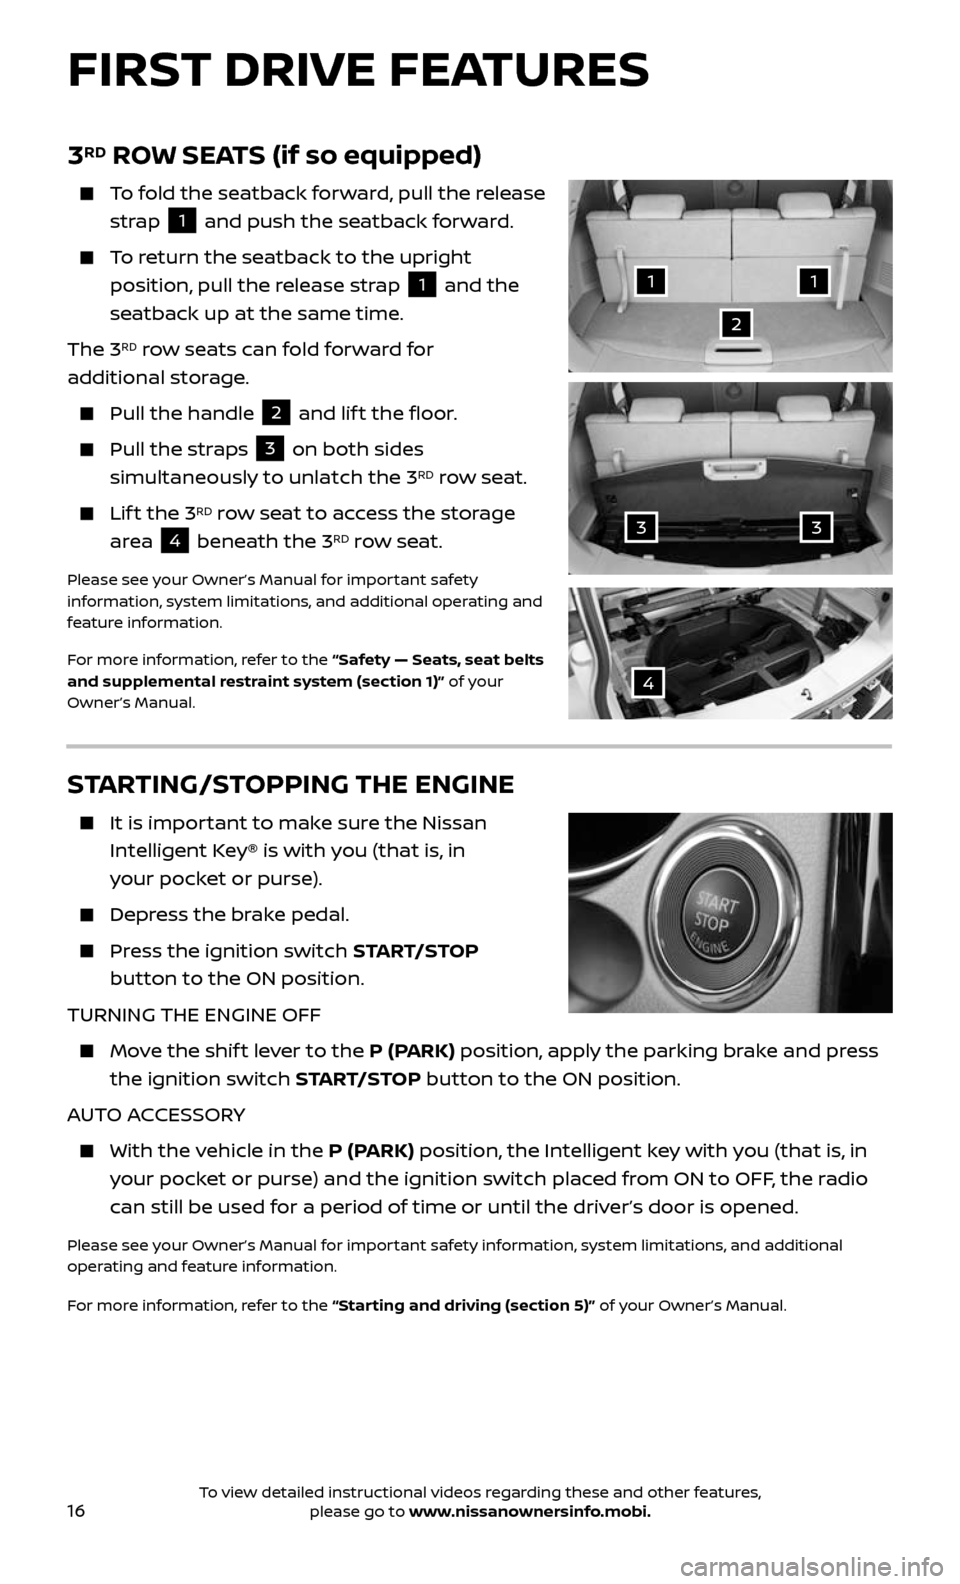 NISSAN ROGUE 2017 2.G Quick Reference Guide 16
3RD ROW SEATS (if so equipped)
    To fold the seatback forward, pull the release  
strap 
1 and push the seatback forward.
    To return the seatback to the upright 
position, pull the release str